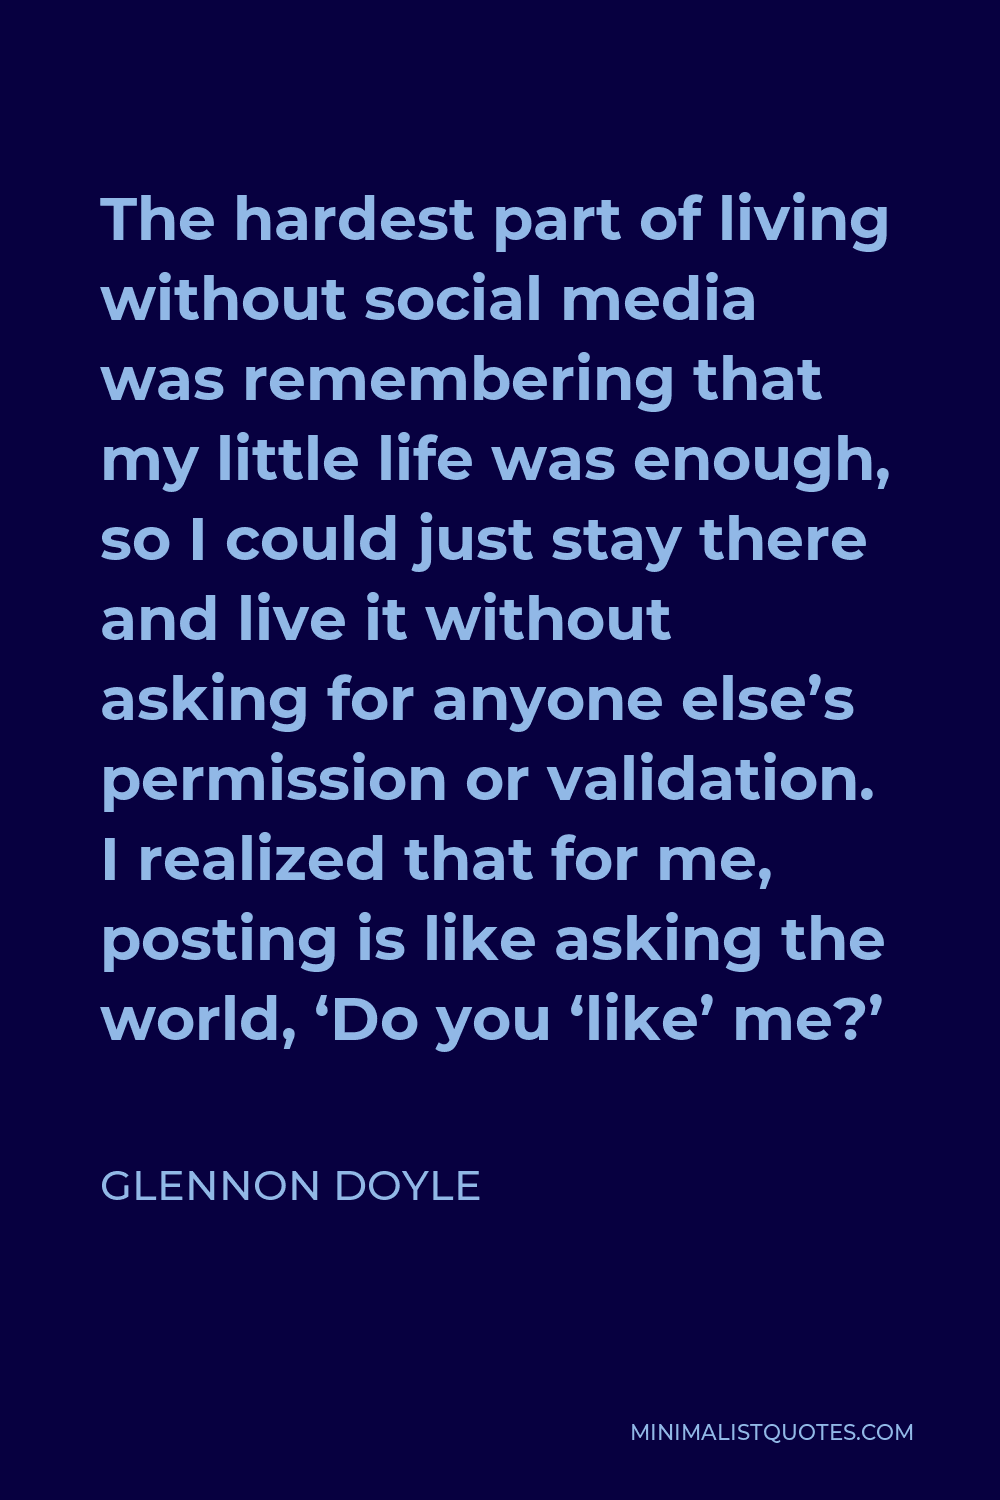 Glennon Doyle Quote - The hardest part of living without social media was remembering that my little life was enough, so I could just stay there and live it without asking for anyone else’s permission or validation. I realized that for me, posting is like asking the world, ‘Do you ‘like’ me?’